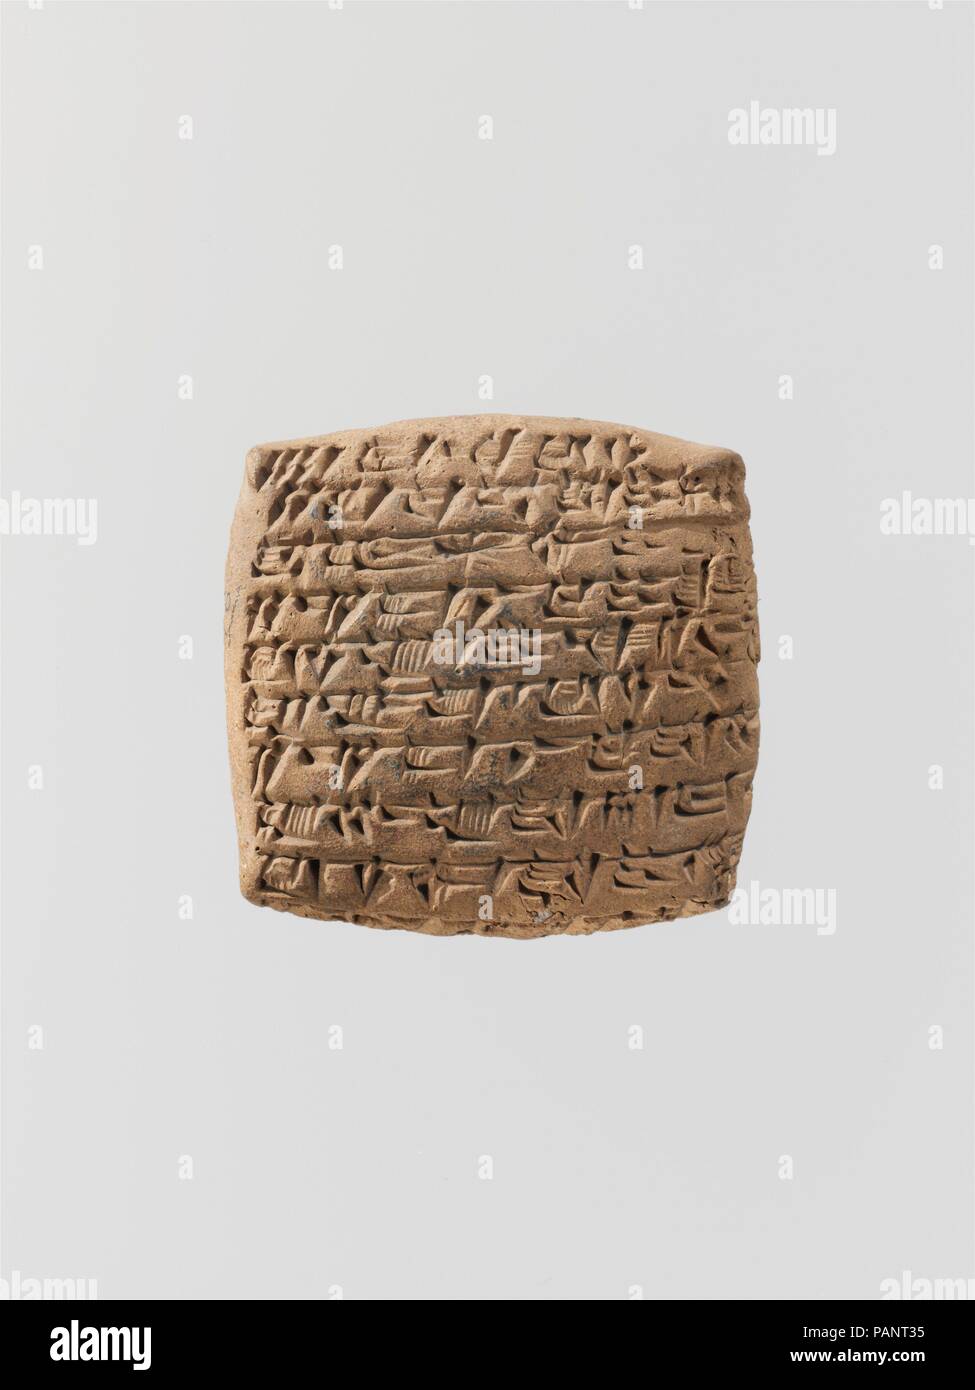 Cuneiform tablet: quittance for a loan in silver. Culture: Old Assyrian Trading Colony. Dimensions: 4.6 x 4.7 x 1.5 cm (1 3/4 x 1 7/8 x 5/8 in.). Date: ca. 20th-19th century B.C..  Kültepe, the ancient city of Kanesh, was part of the network of trading settlements established in central Anatolia by merchants from Ashur (in Assyria in northern Mesopotamia) in the early second millennium B.C. Travelling long distances, and often living separately from their families, these merchants traded vast quantities of goods, primarily tin and textiles, for Anatolian copper and other materials. Although th Stock Photo